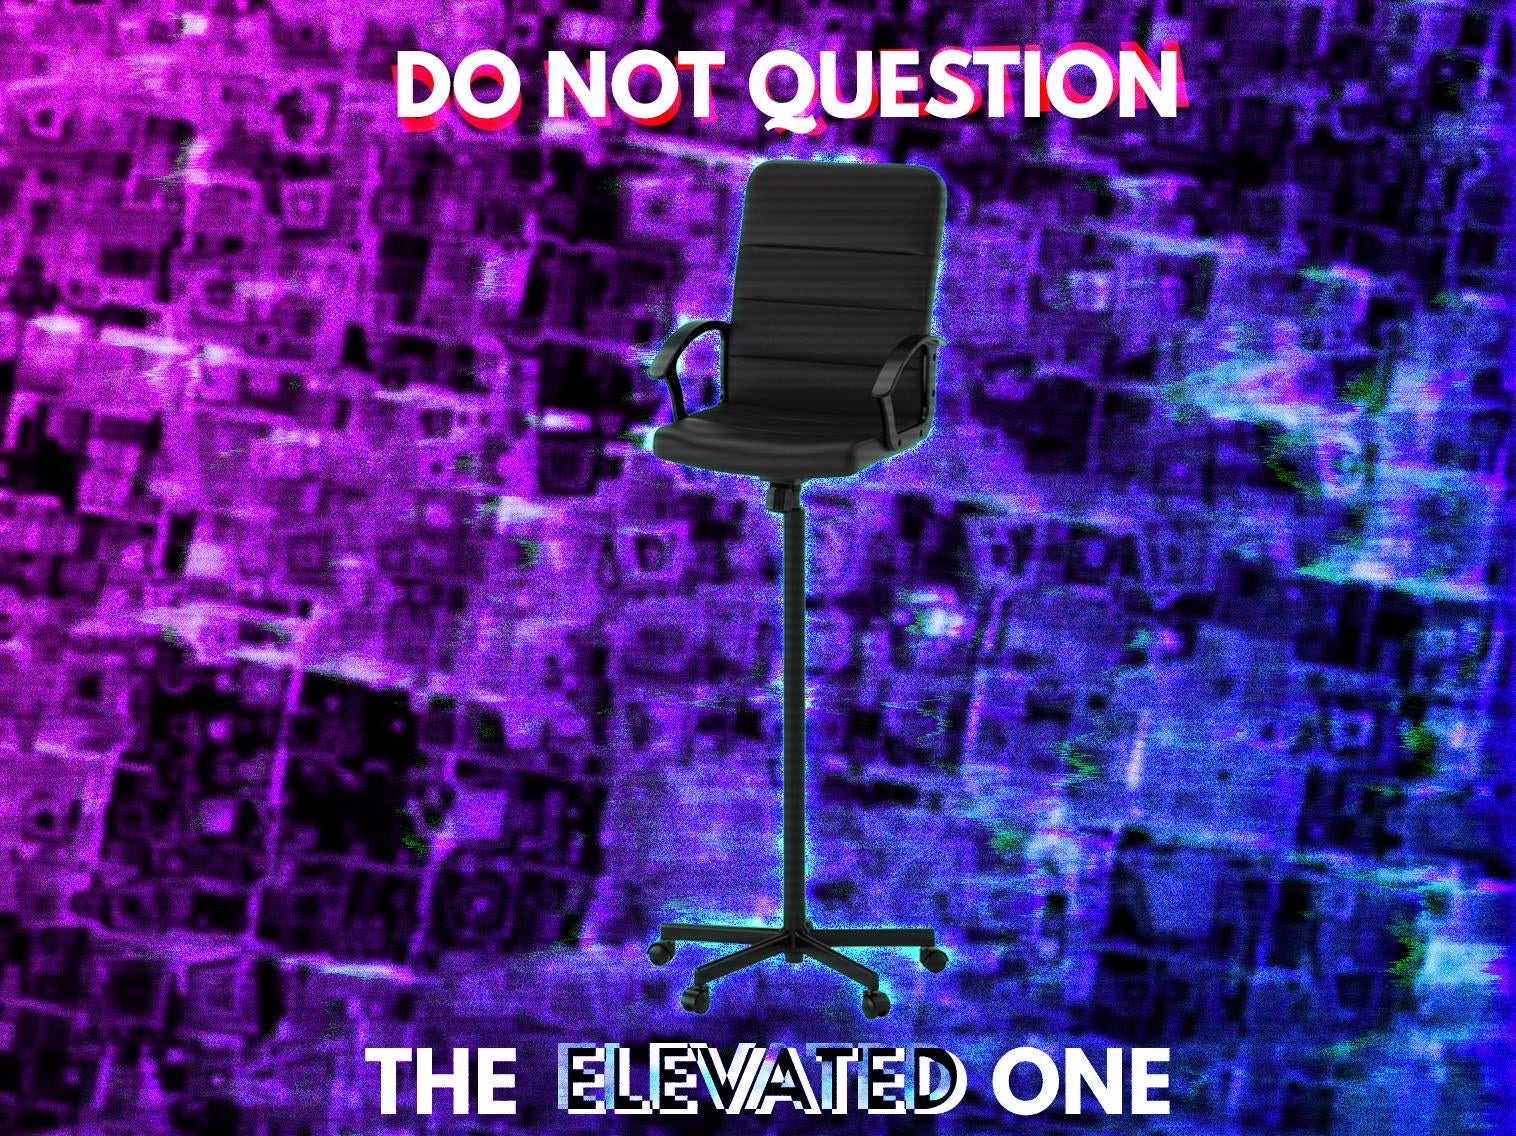 do not question the elevated one - Do Not Question The Elevated One